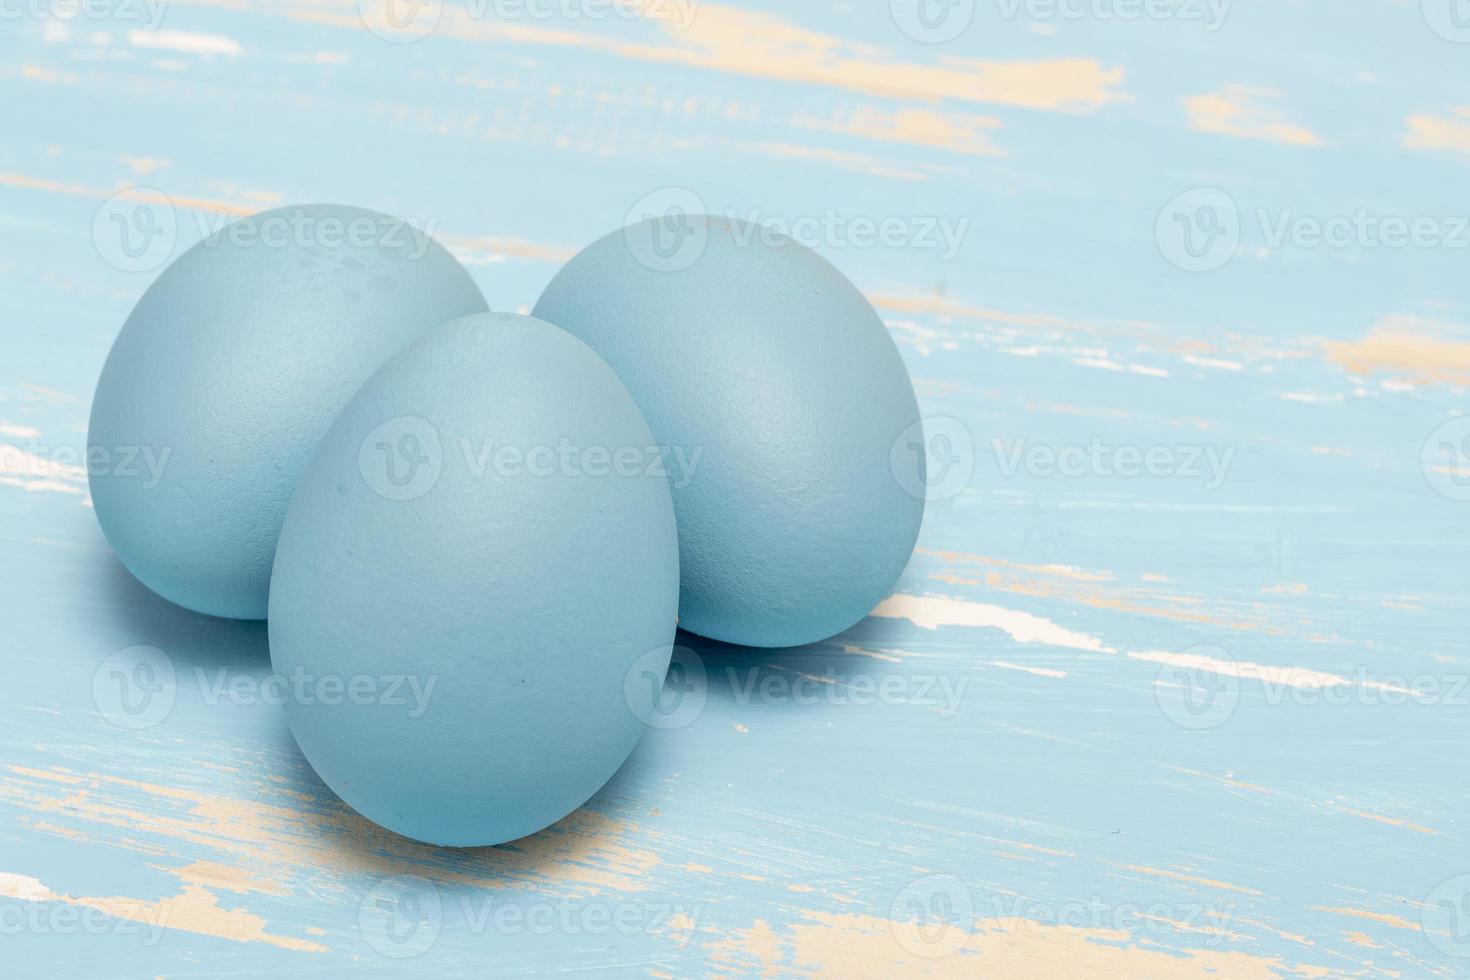 Eggs symbolizing the Easter holiday in blue color on a background of aged wood photo